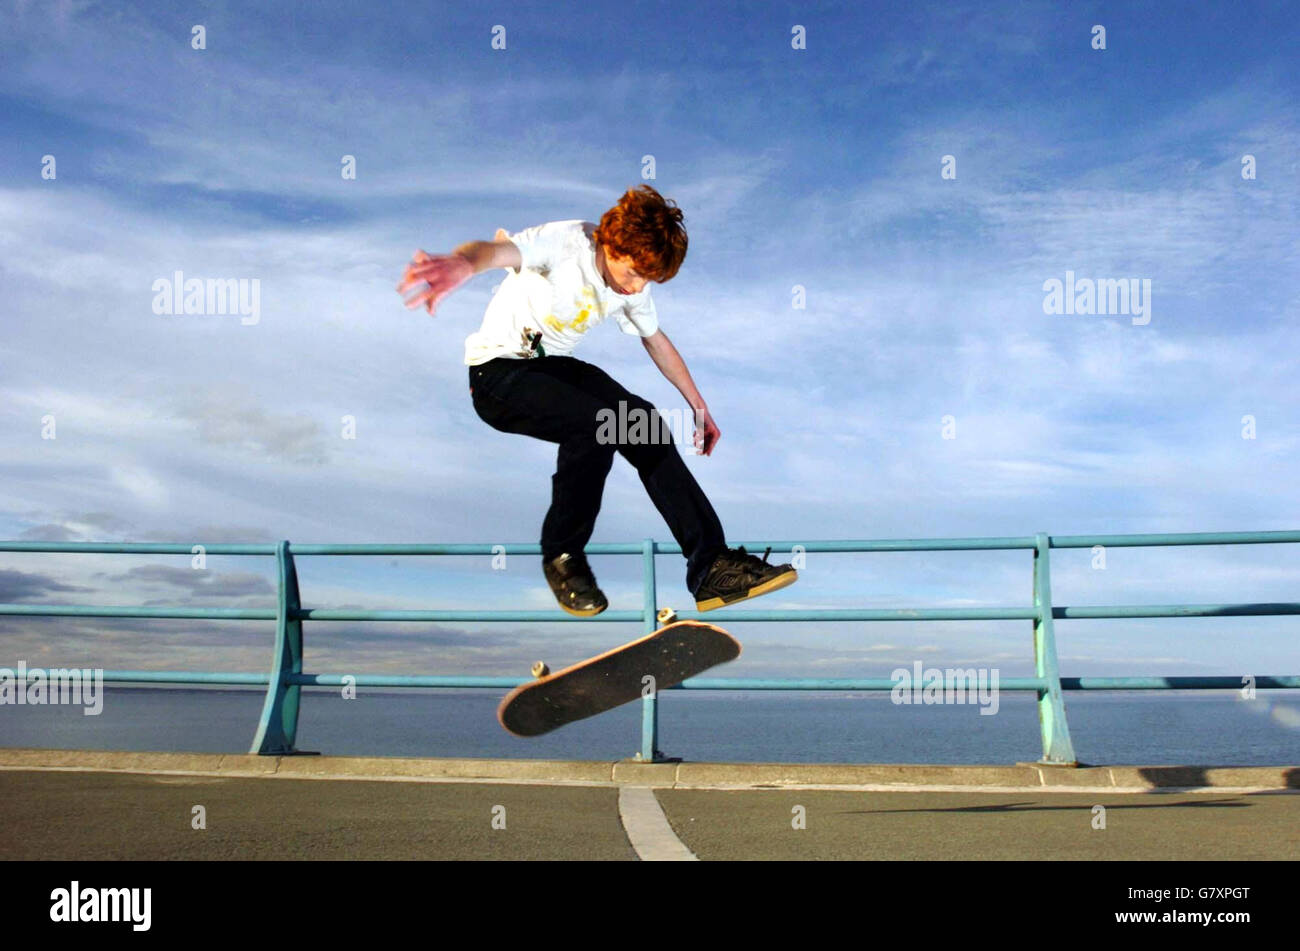 A skateboarder enjoys the warm weather on the seafront at Dun Laoghaire, Ireland. Stock Photo